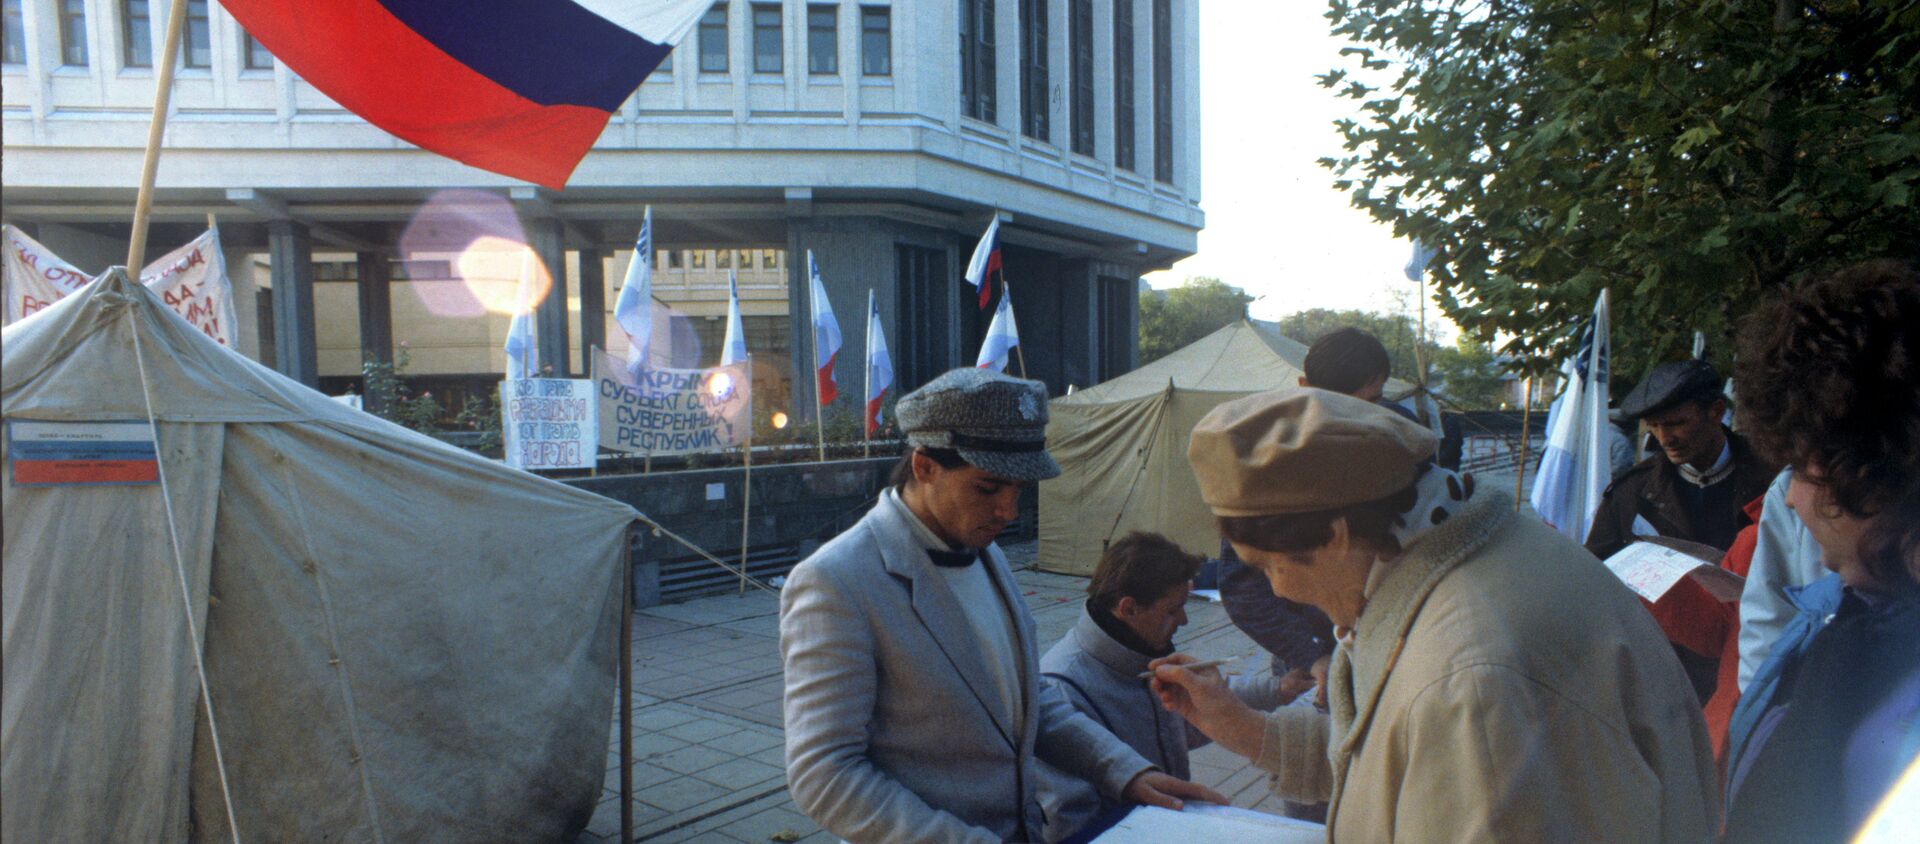 Activists of the Crimean Republican Movement collecting signatures for holding a referendum on the peninsula’s independence - Sputnik International, 1920, 13.08.2015